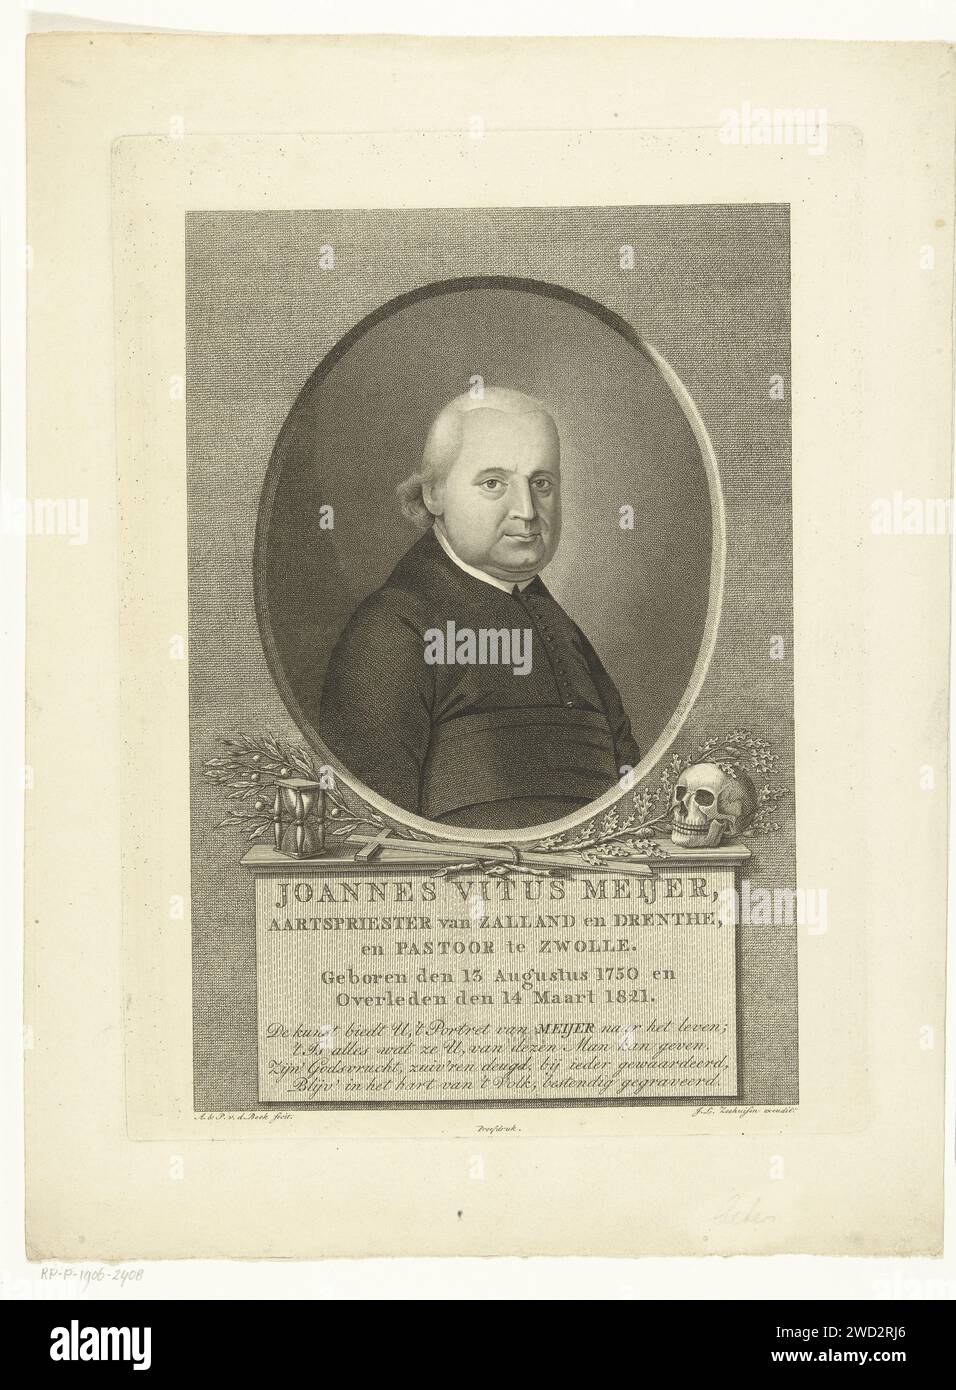 Portrait of arch priest Johannes Vitus Meijer, Antonie and Pieter van der Beek, 1821 print Bust of Arch priest Johannes Vitus Meijer in ovale frame with symbols under the portrait ofitas such as a skull and hourglass. Under the name and title of the man is a praise.  paper etching chief priests  hierarchy of priests. skull as symbol of 'Vanitas'. hourglass Stock Photo